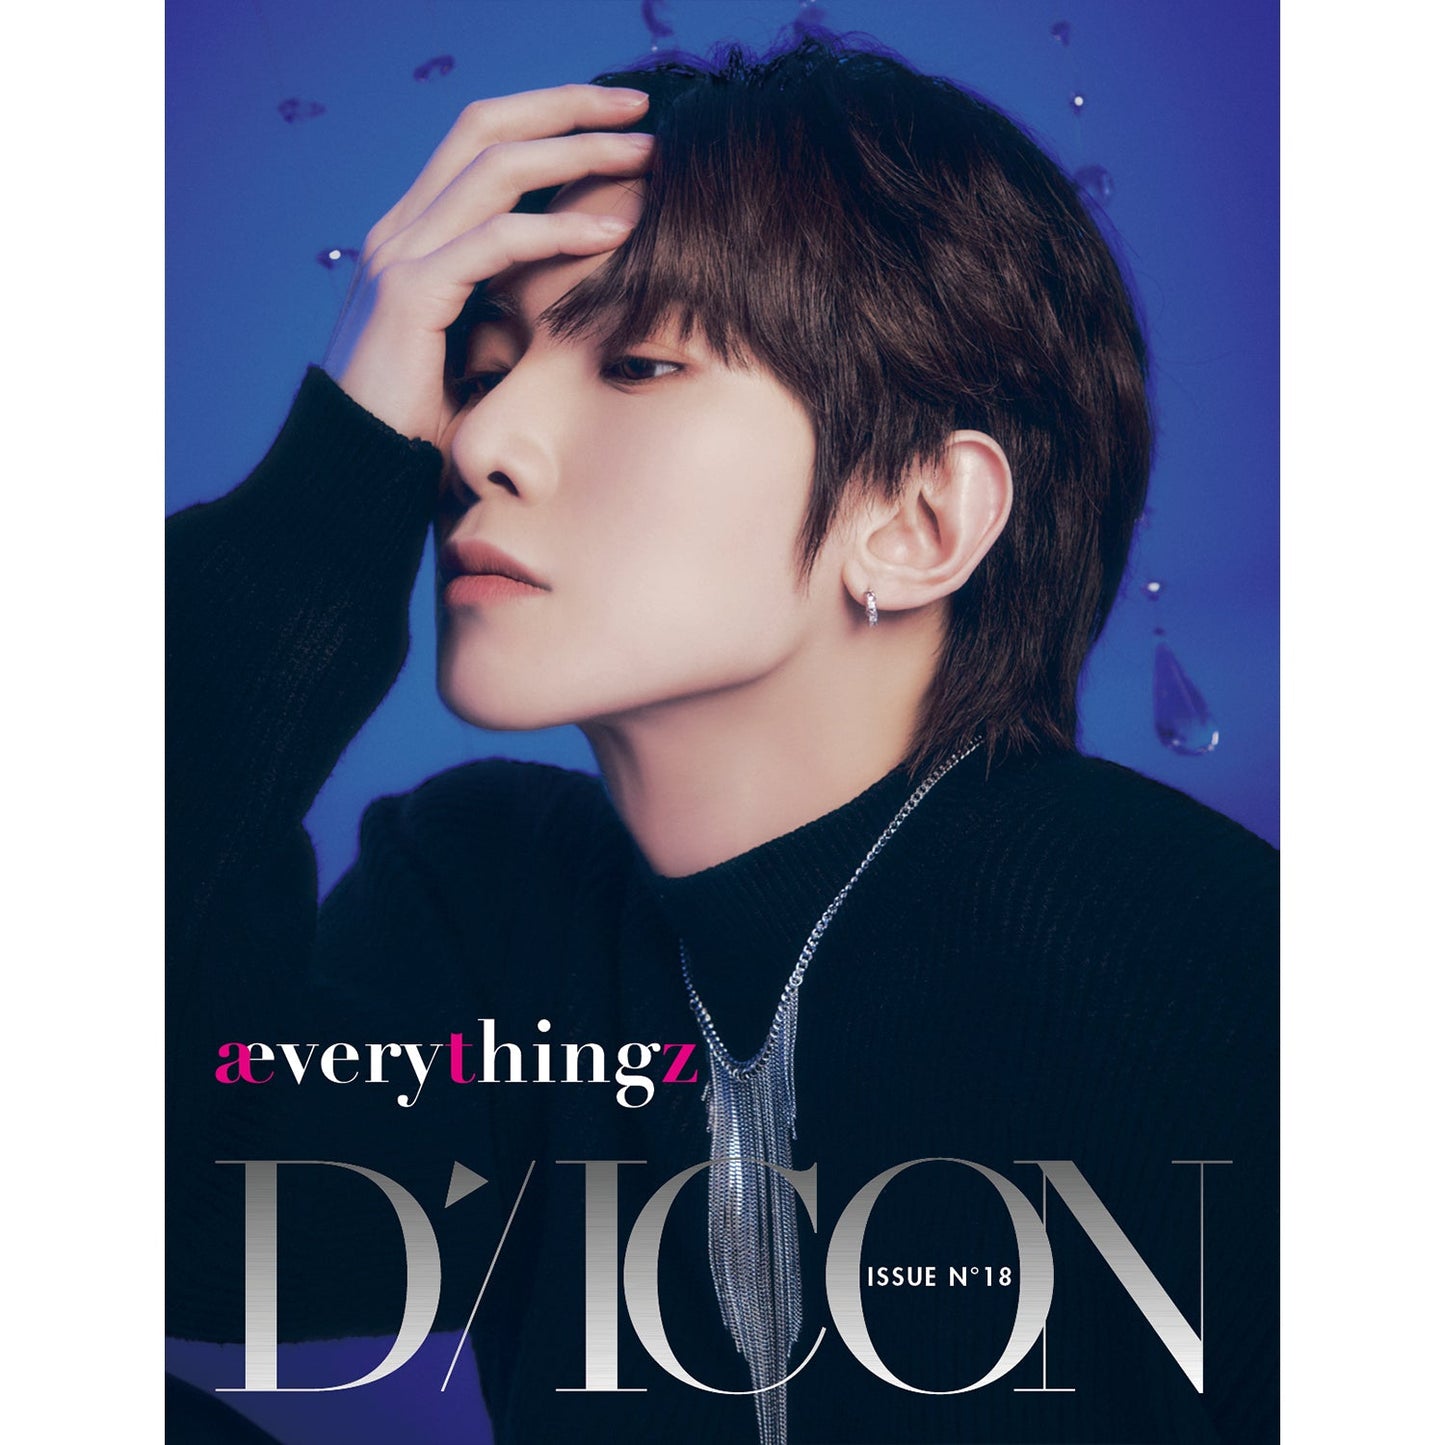 ATEEZ DICON 'ISSUE N°18 ATEEZ : ÆVERYTHINGZ' YEOSANG VERSION COVER